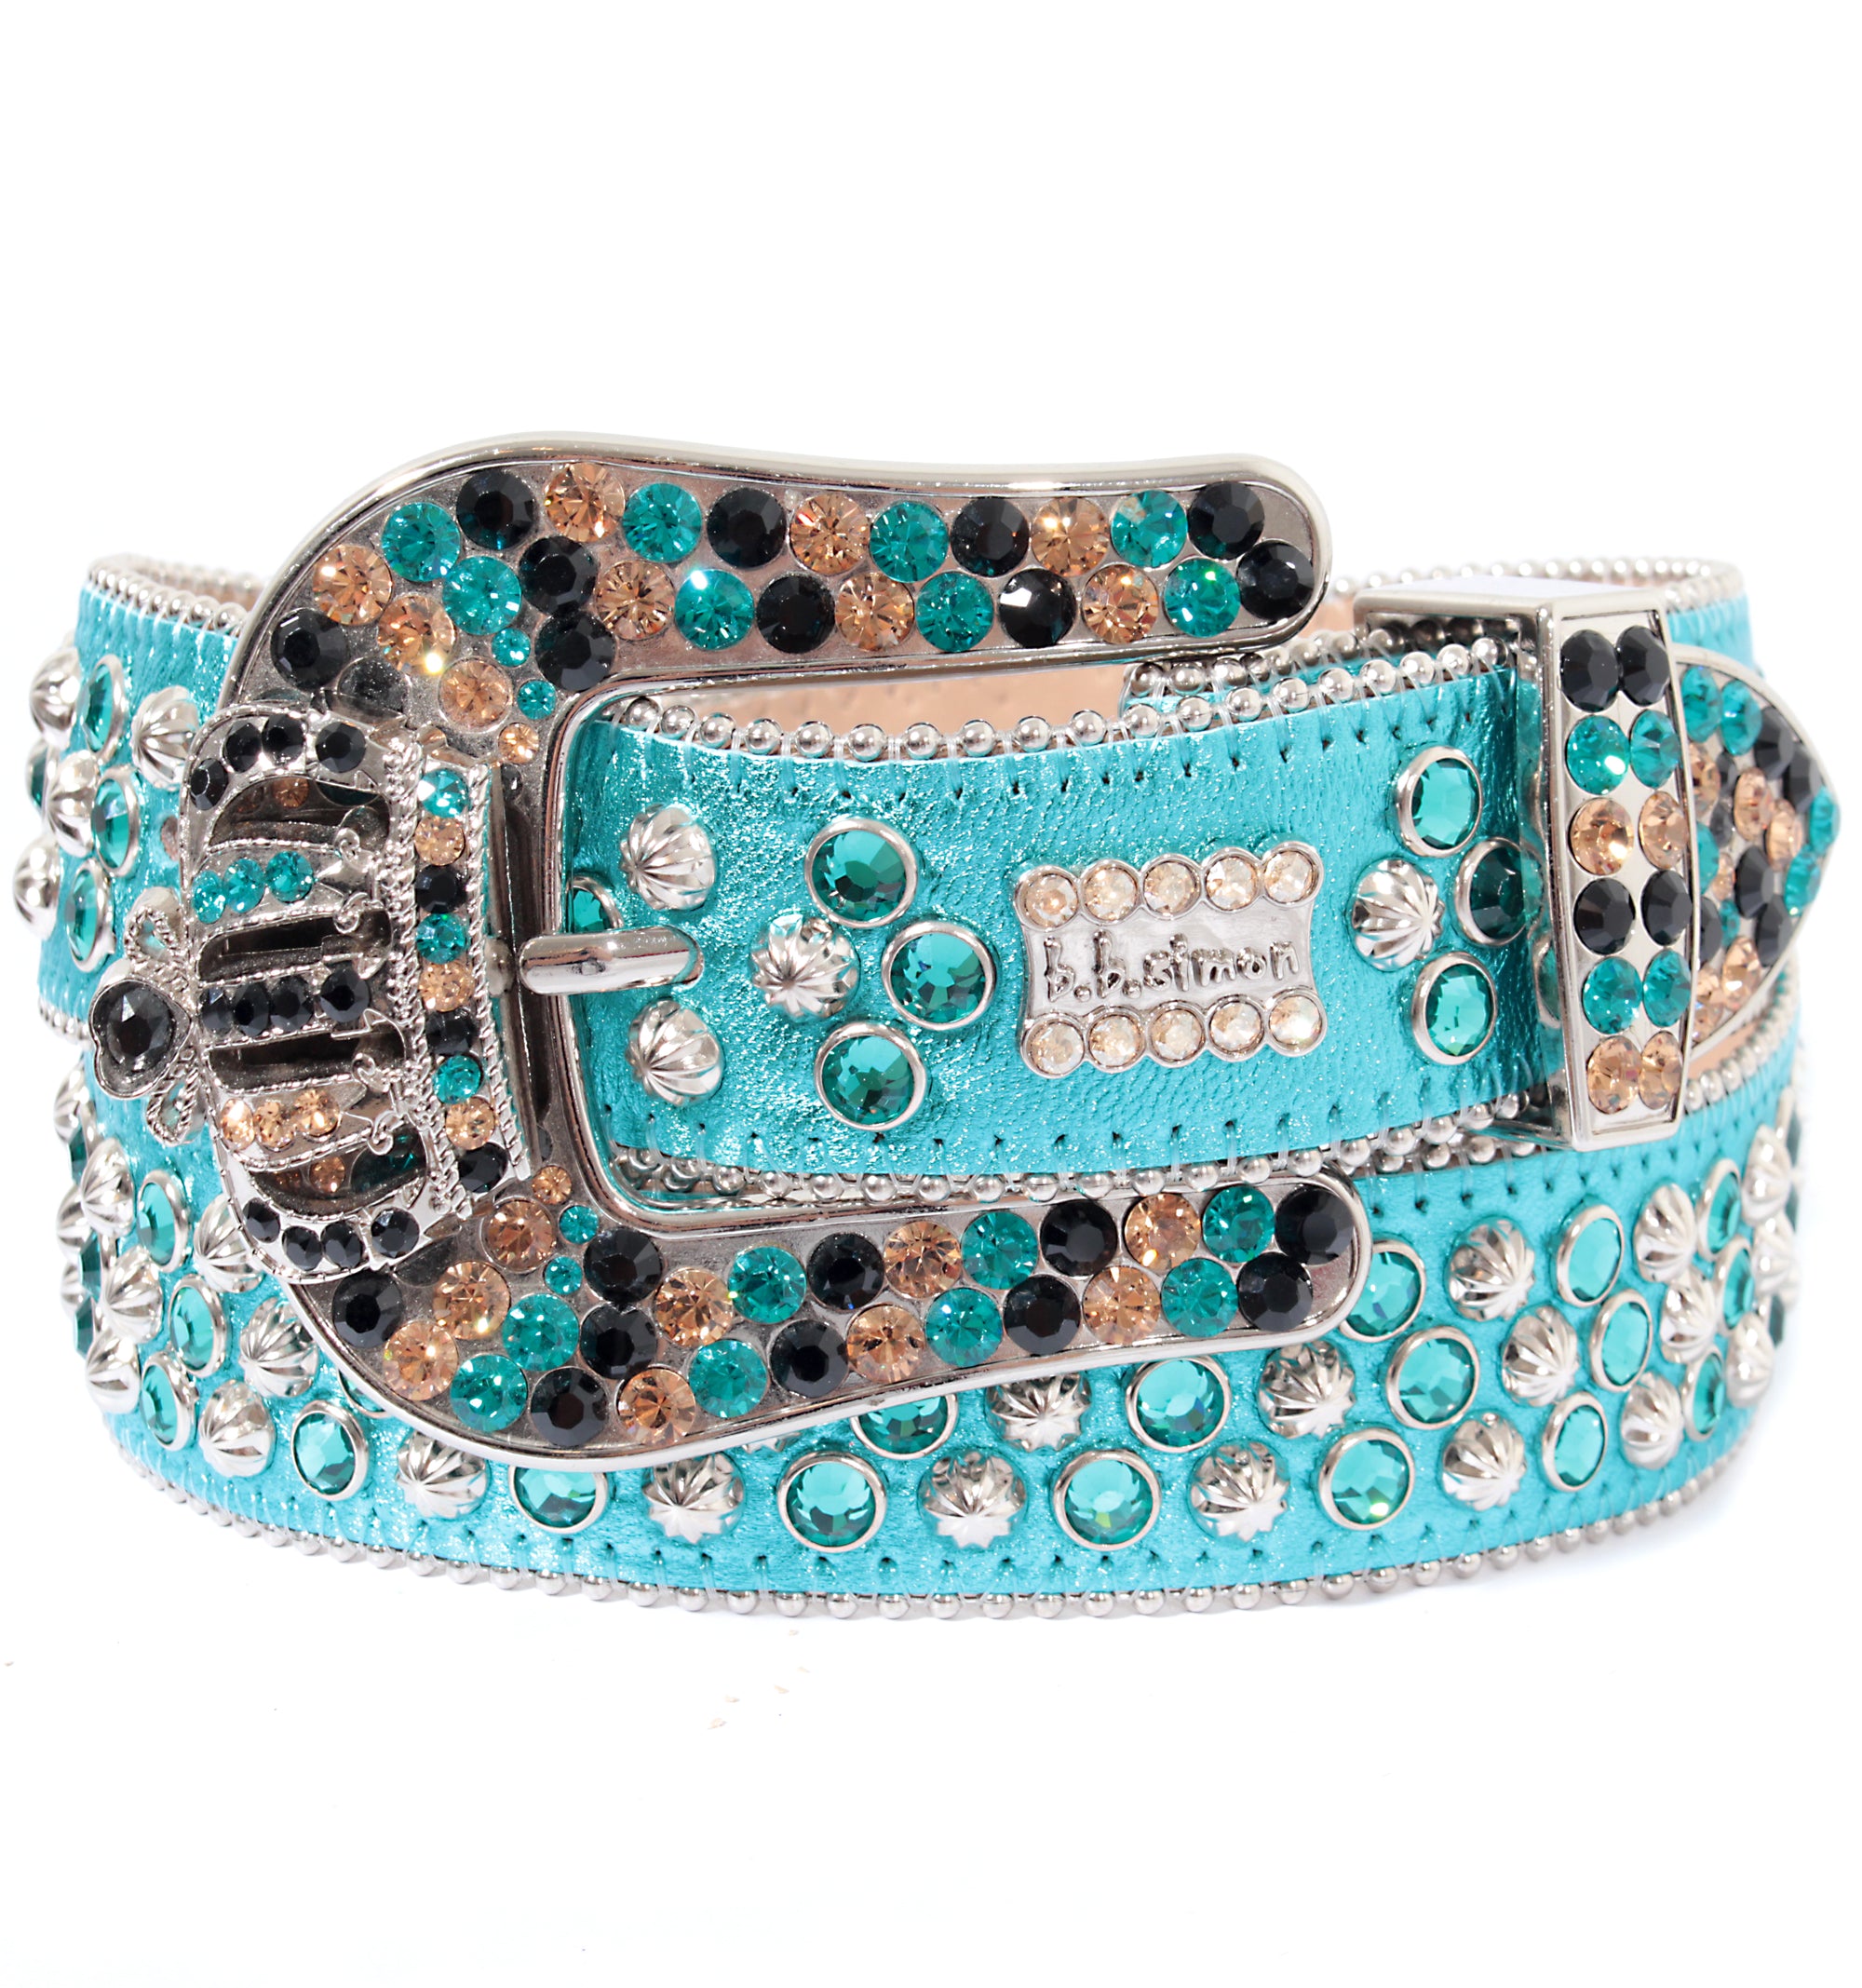 Turquoise belt with crown buckle